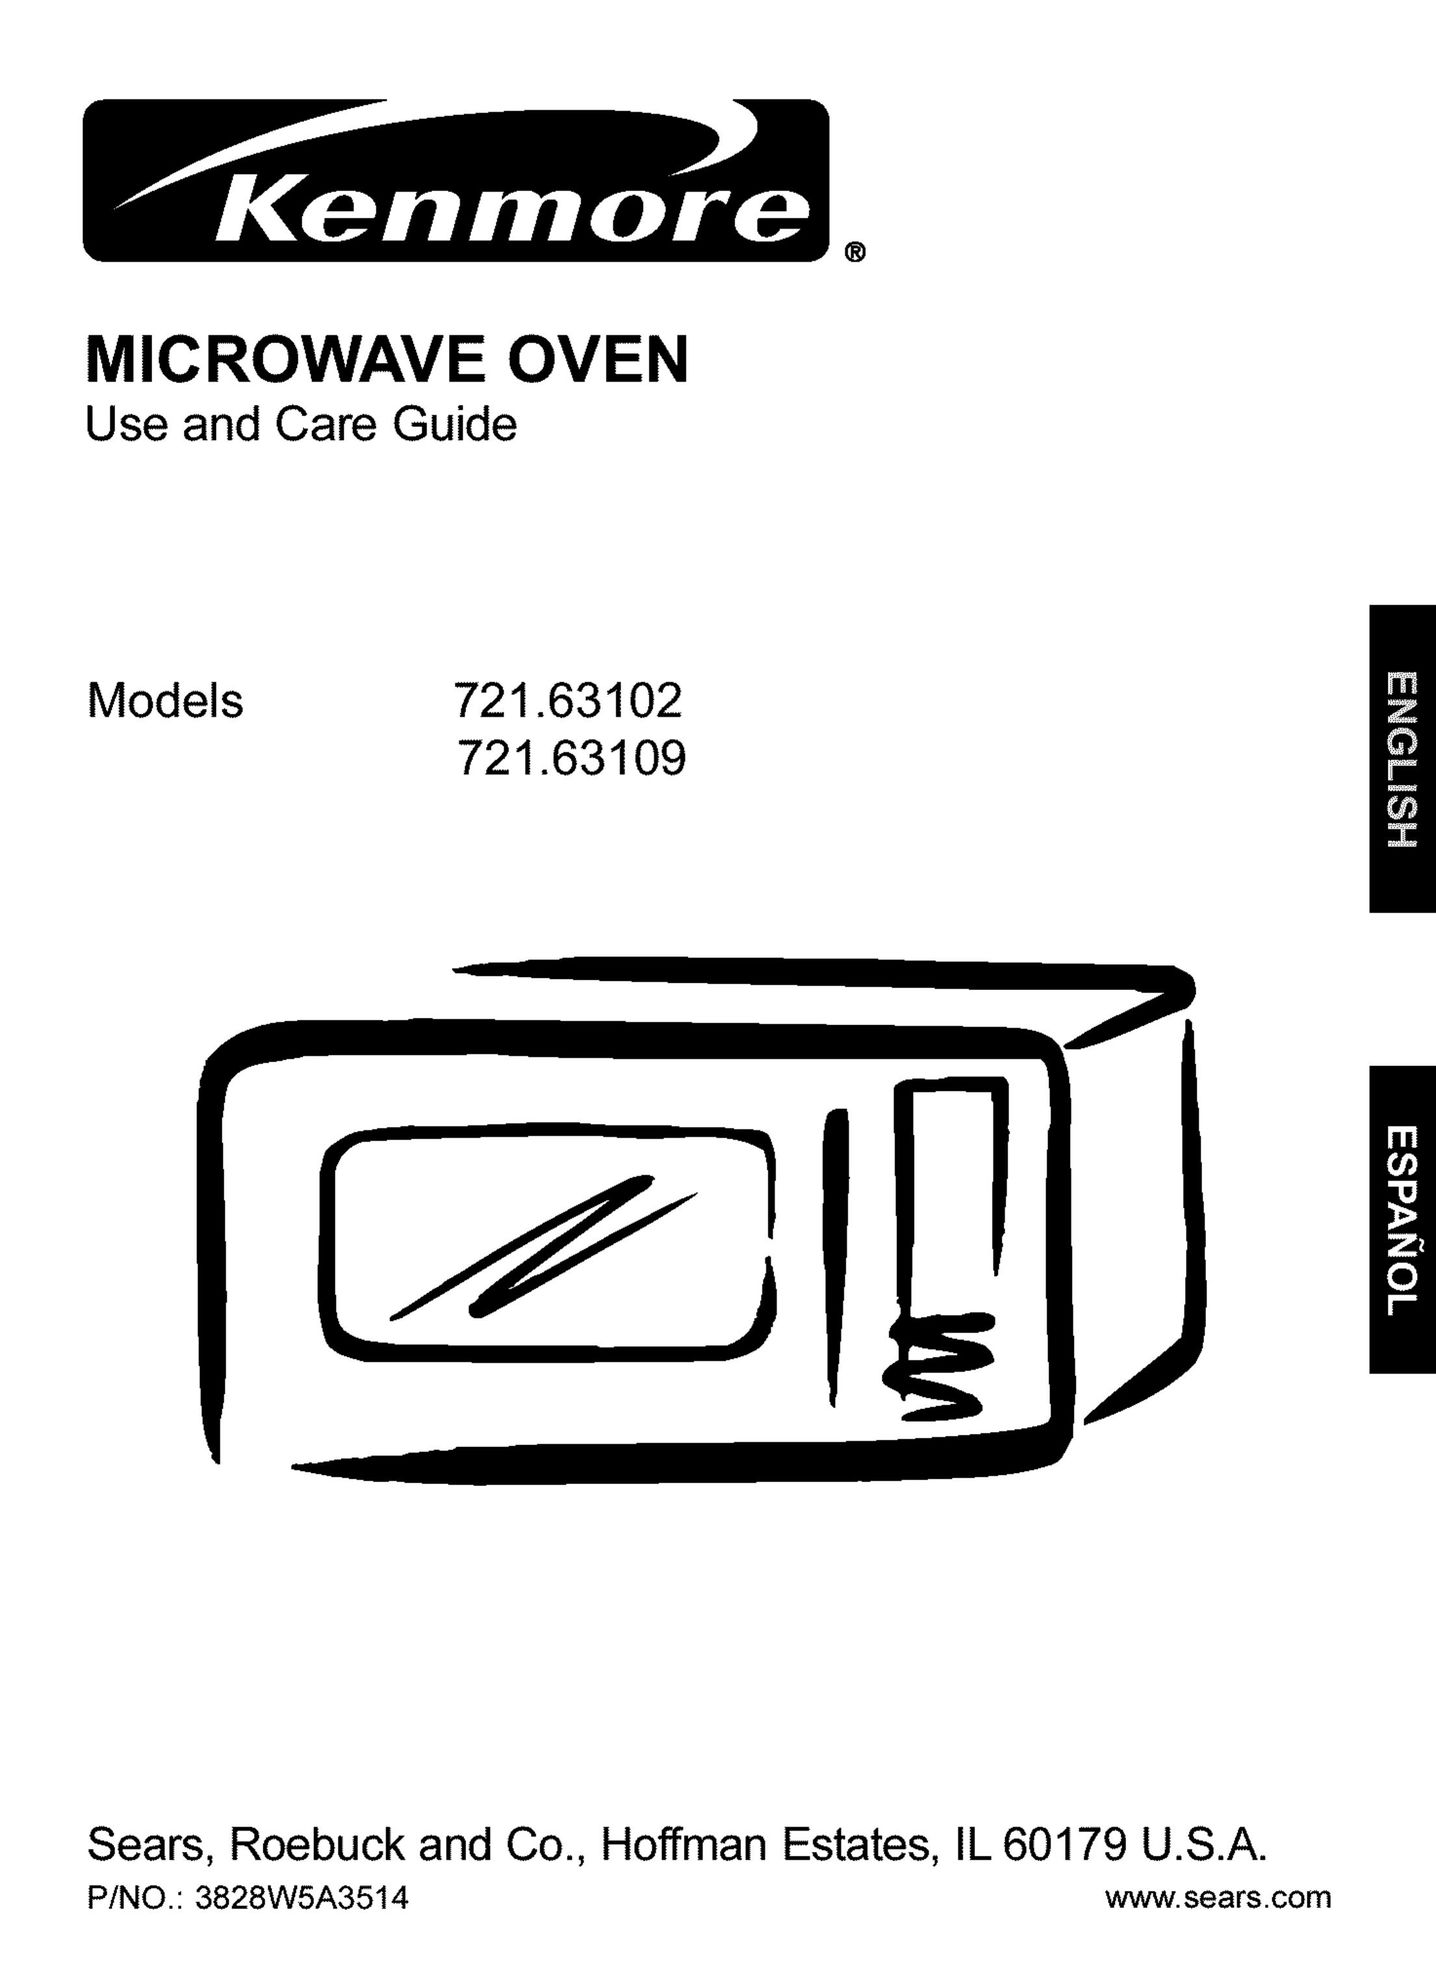 Kenmore 721.63109 Microwave Oven User Manual